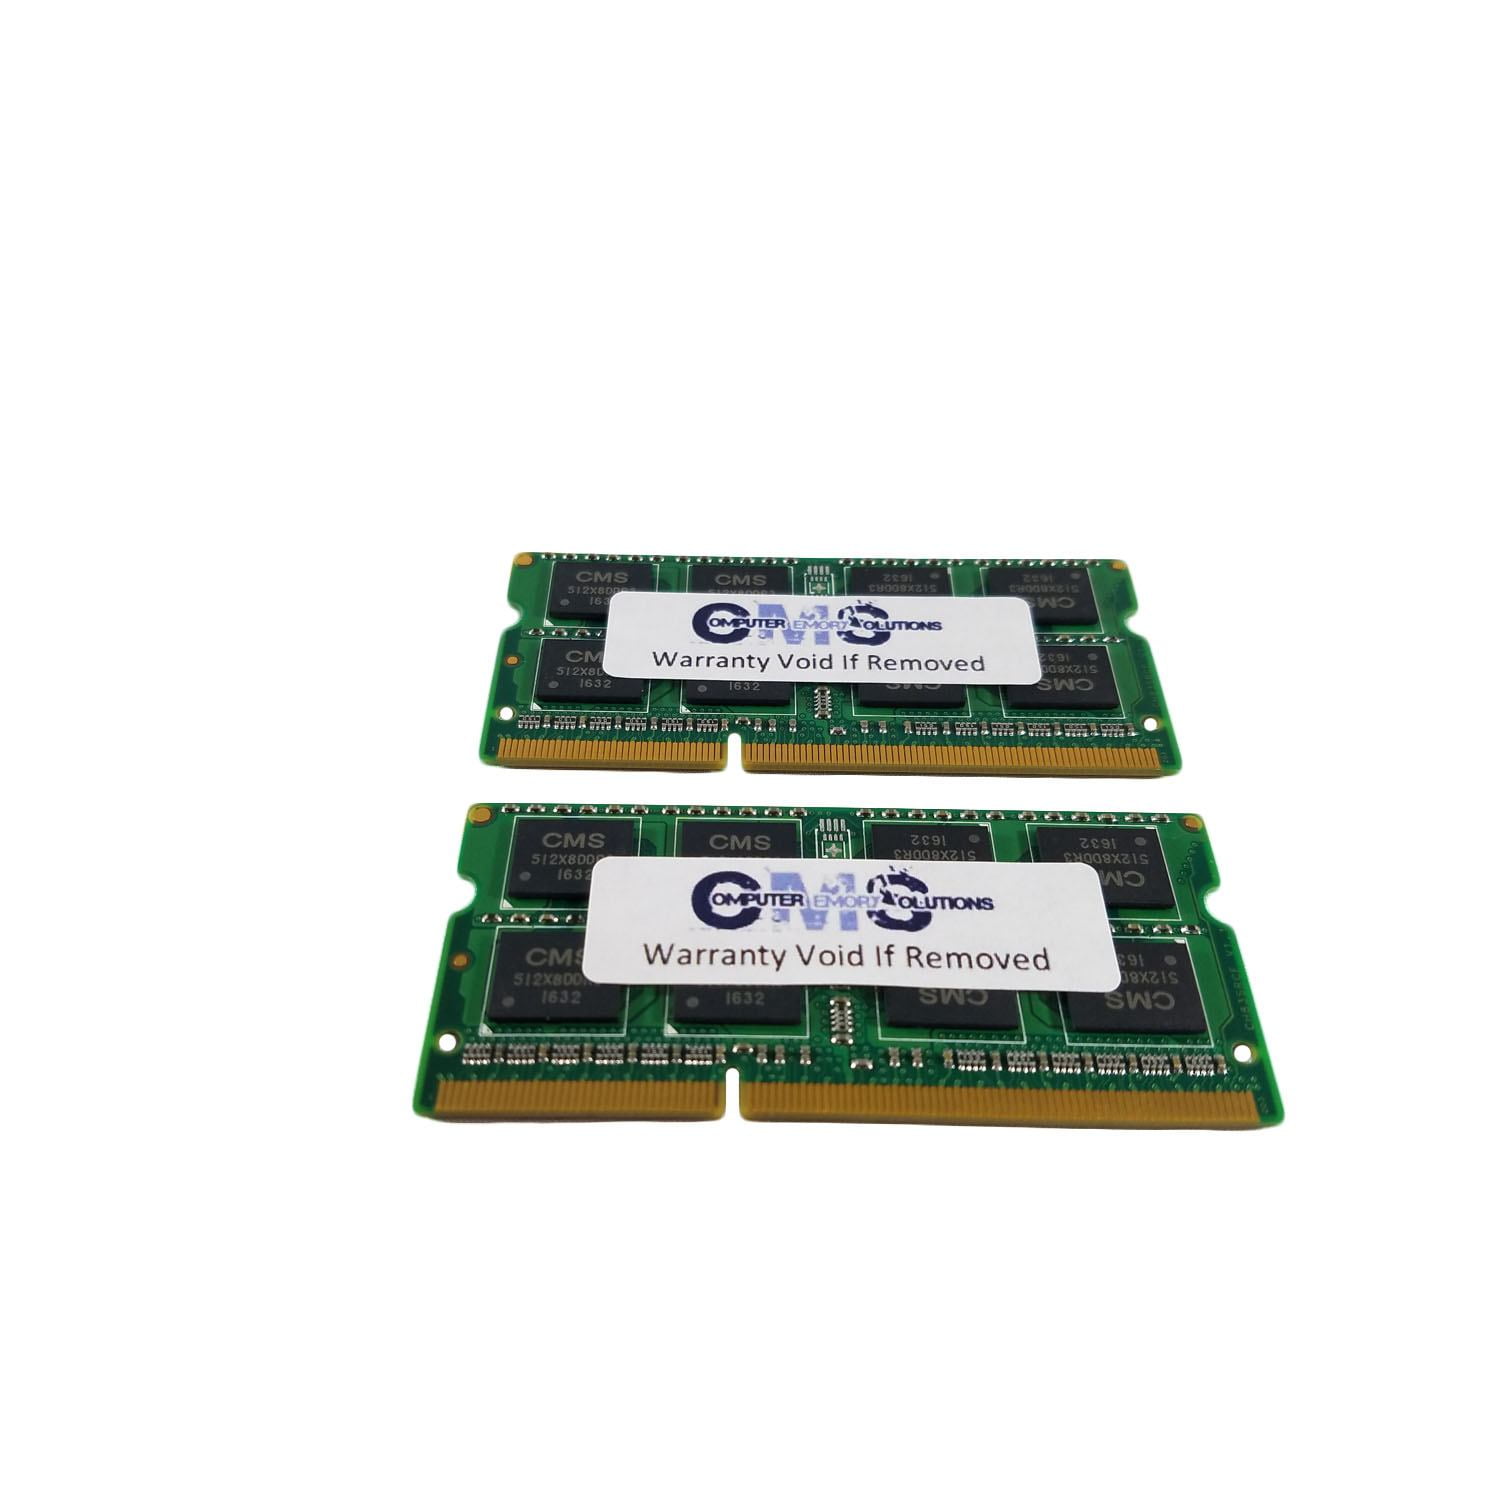 CMS 16GB (2X8GB) DDR3 12800 1600MHz NON ECC SODIMM Ram Upgrade Compatible with Synology® DiskStation DS218+ - A7 - Walmart.com